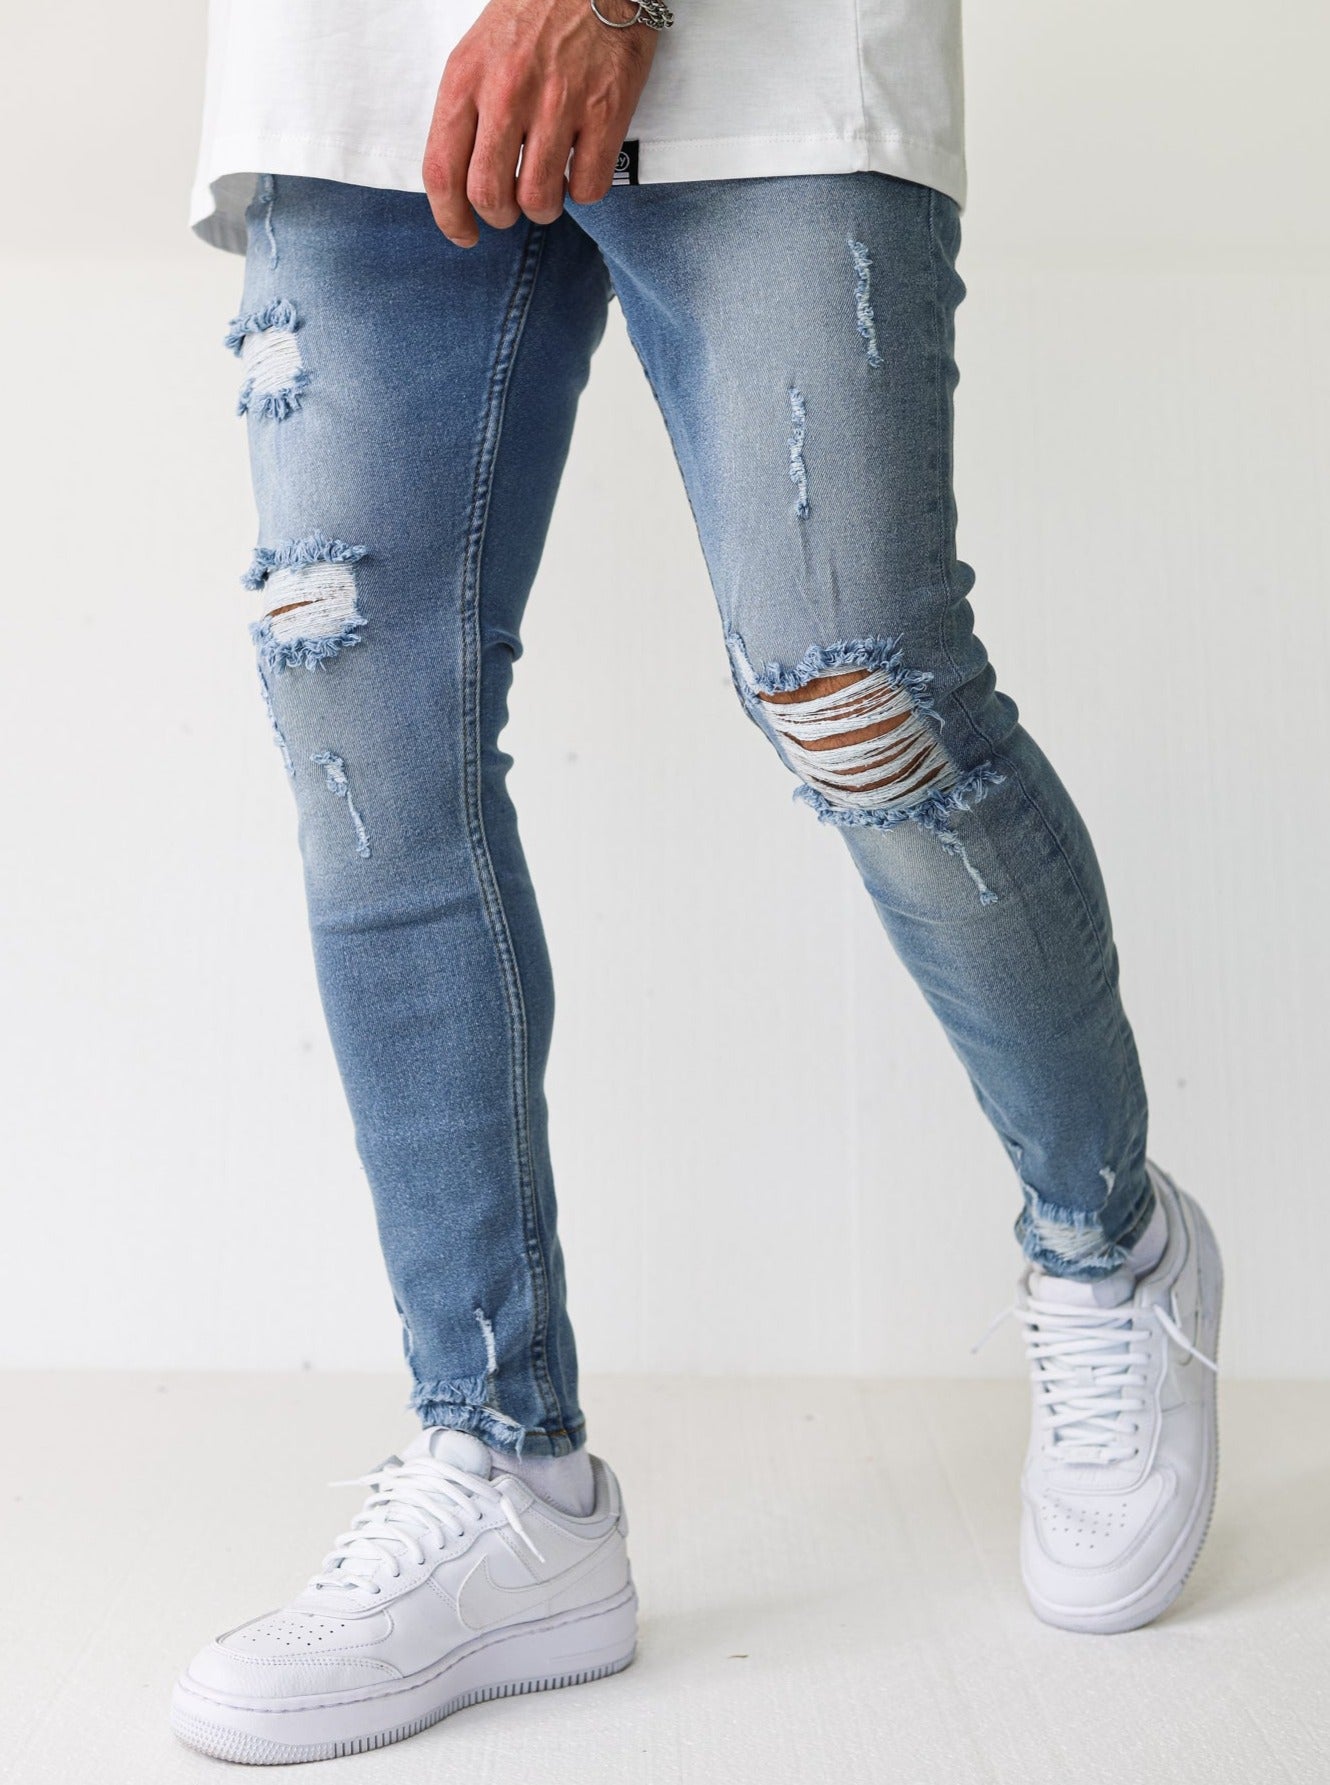 Distressed Ripped Light Blue Jeans - UNEFFECTED STUDIOS® - JEANS - UNEFFECTED